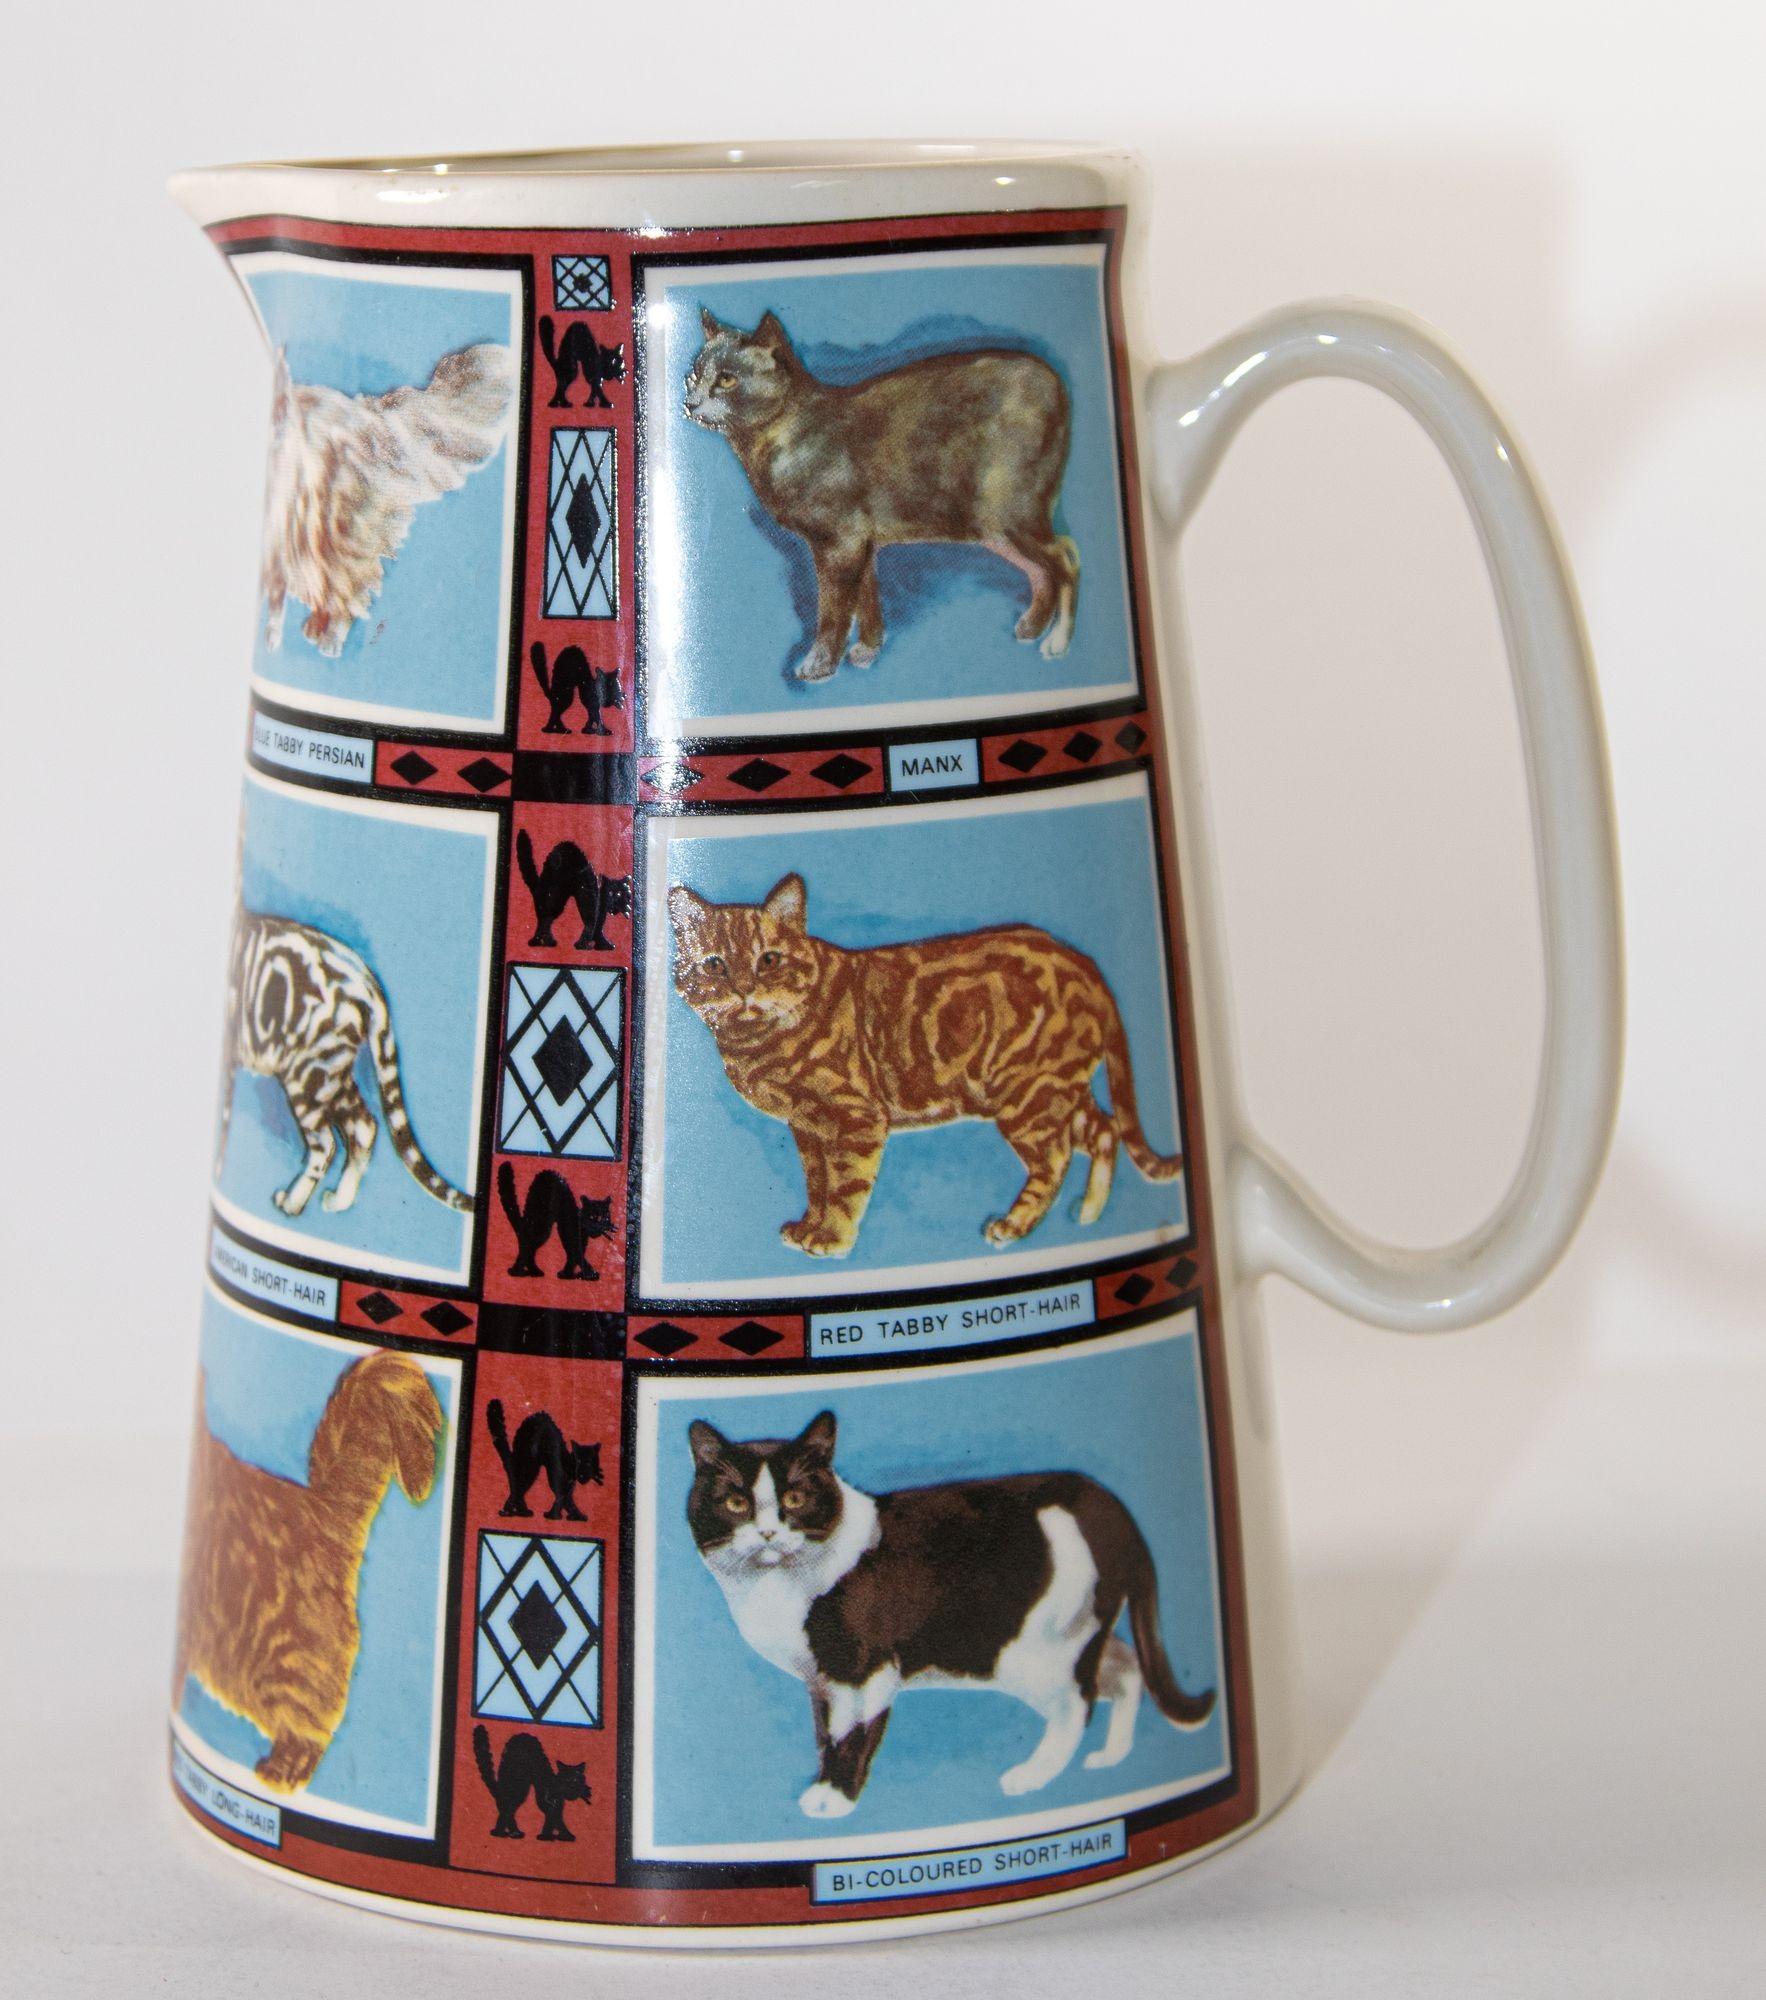 Vintage 1970s Ceramic Pitcher, Derbyshire England with Cat Breeds Pictures 8